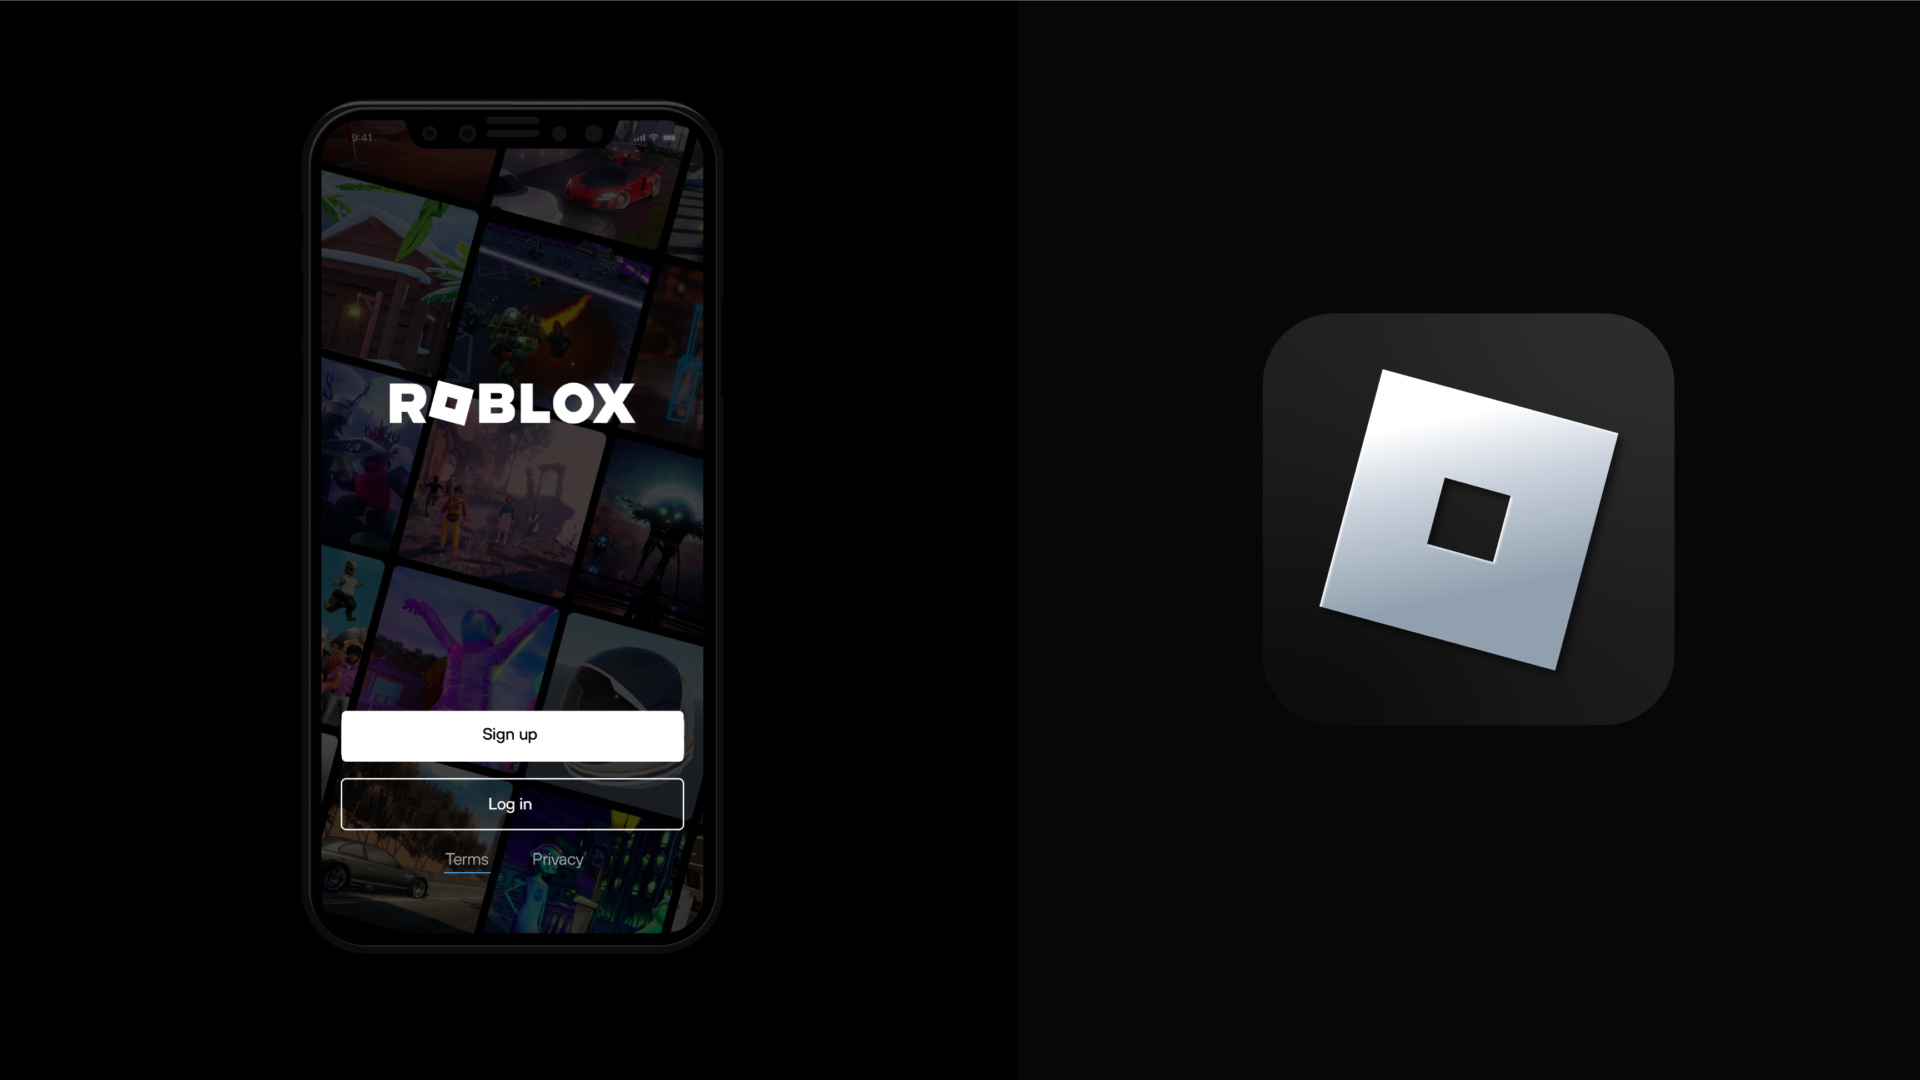 Roblox Remains Painfully Expensive With Ample Room For Further Deterioration, Analyst Says